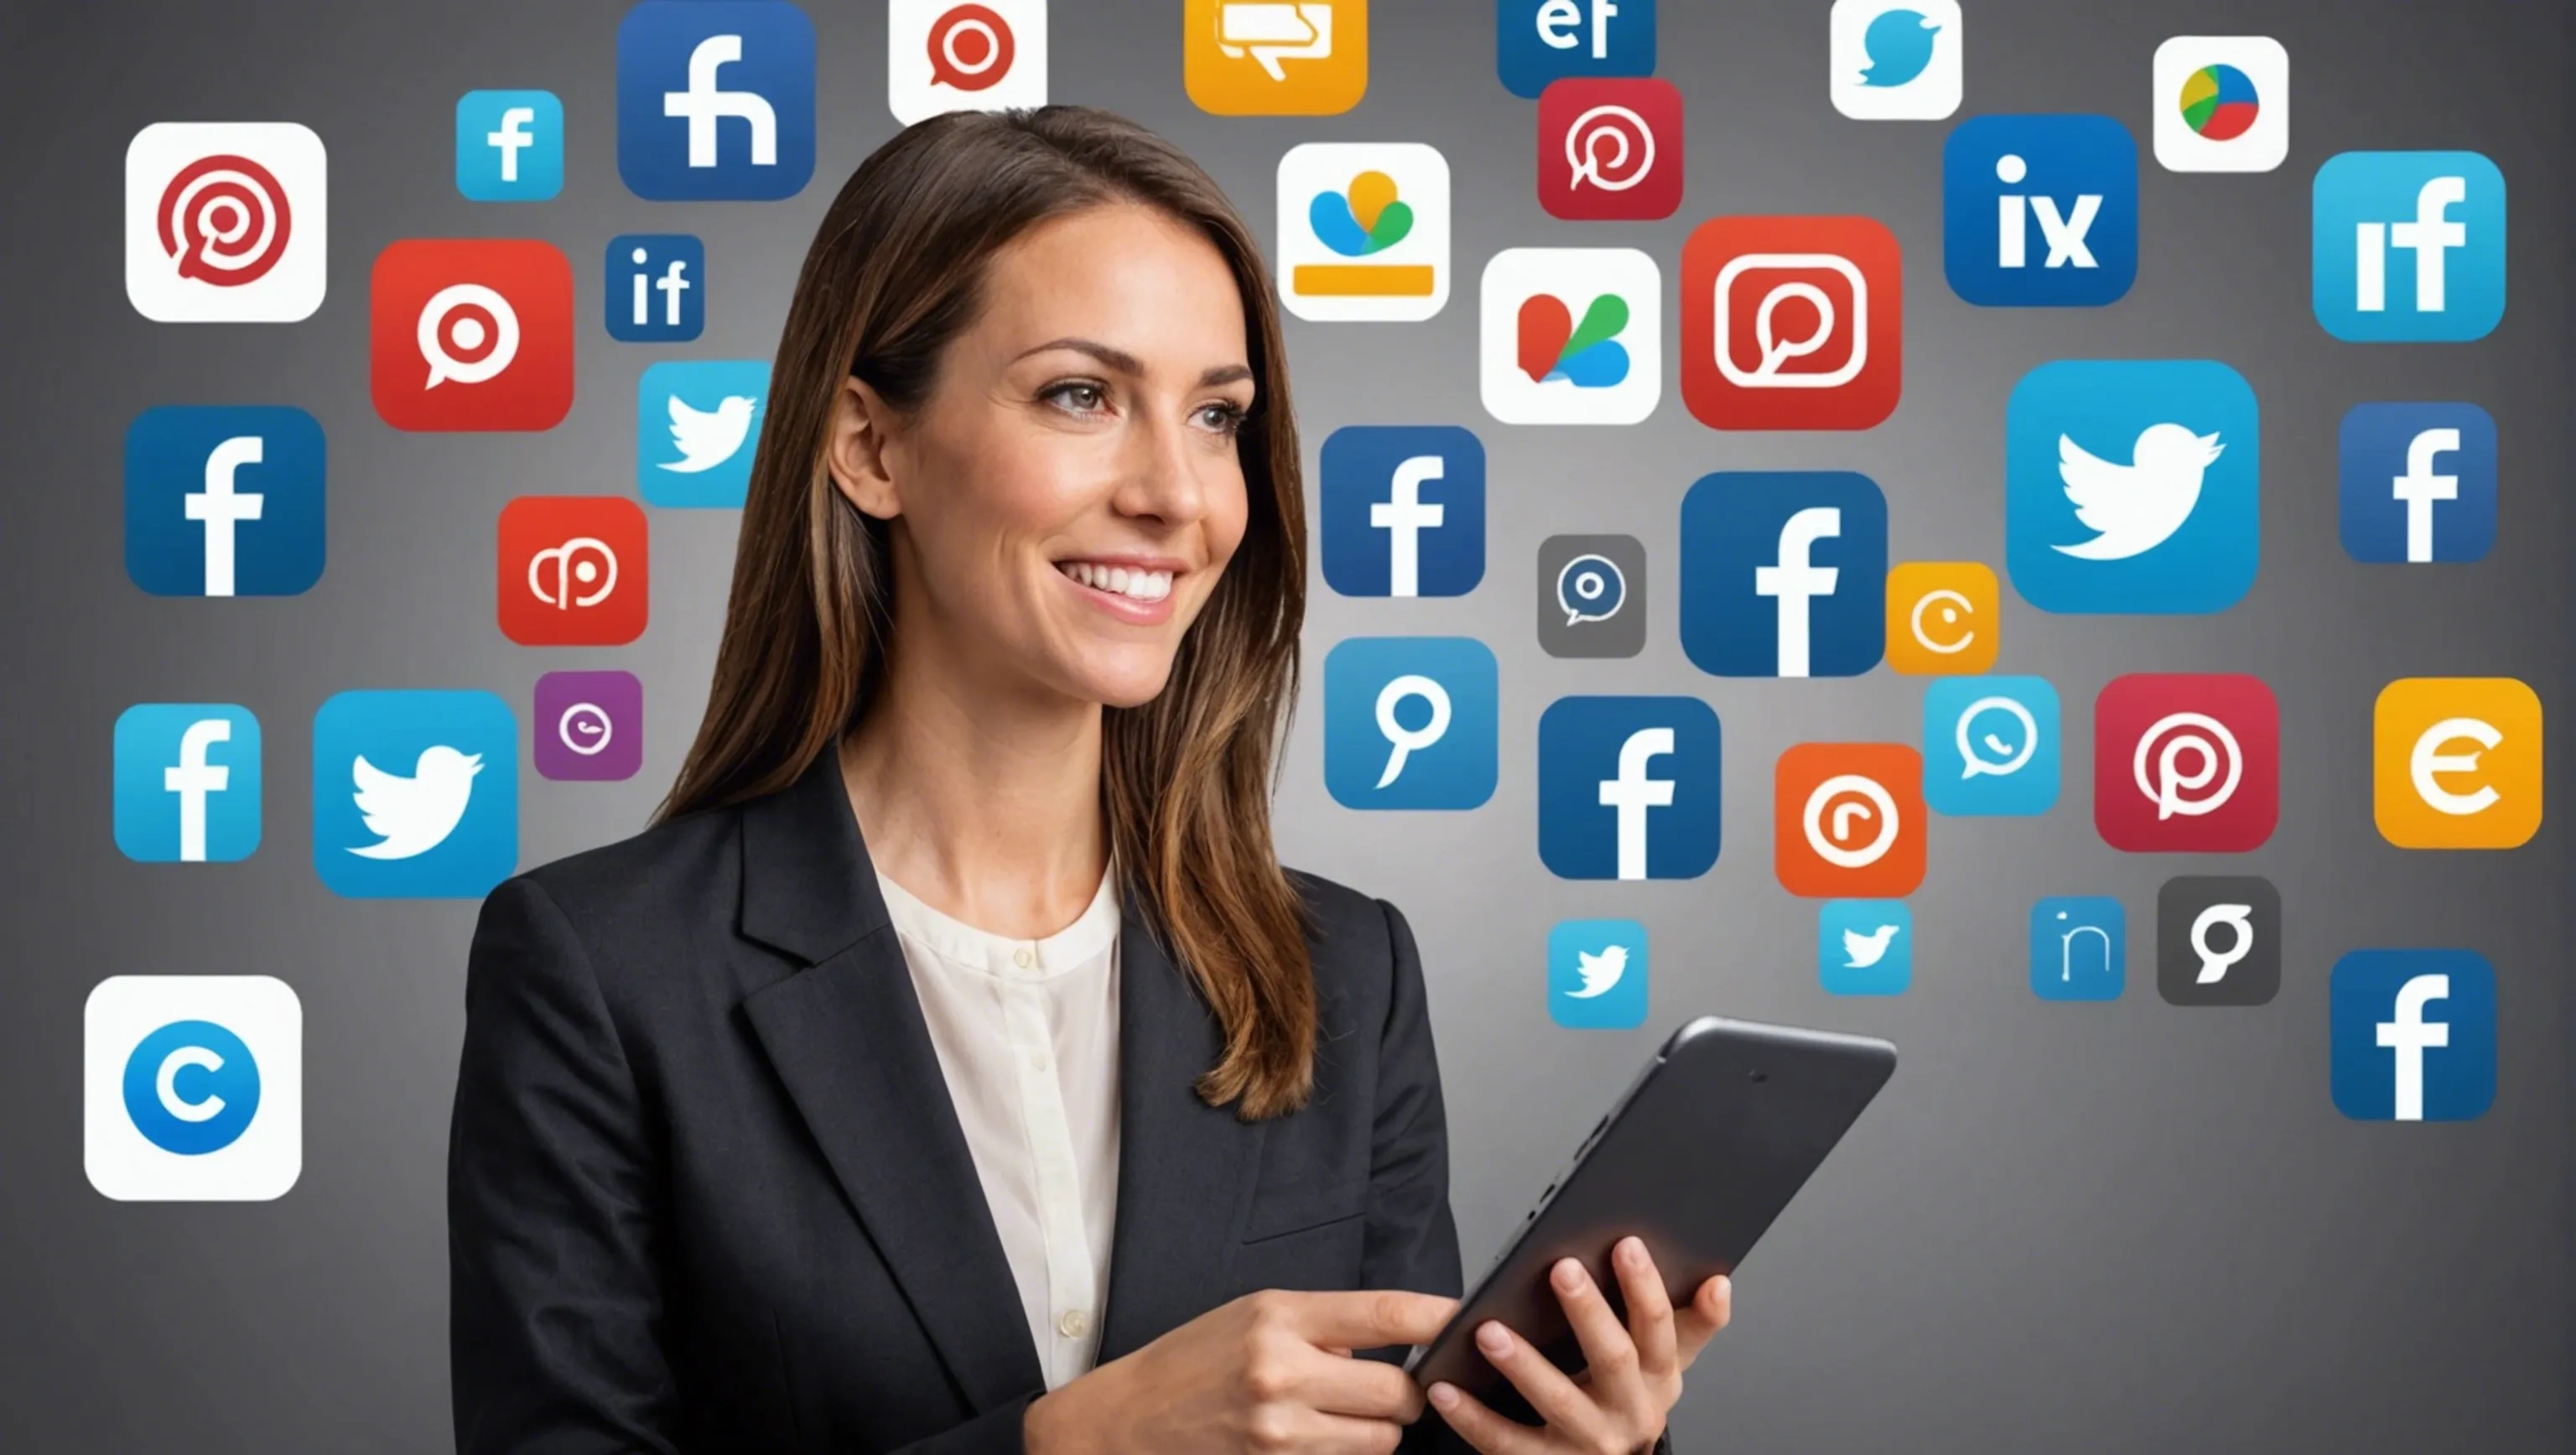 Promoting social media profiles on other platforms for marketing professionals